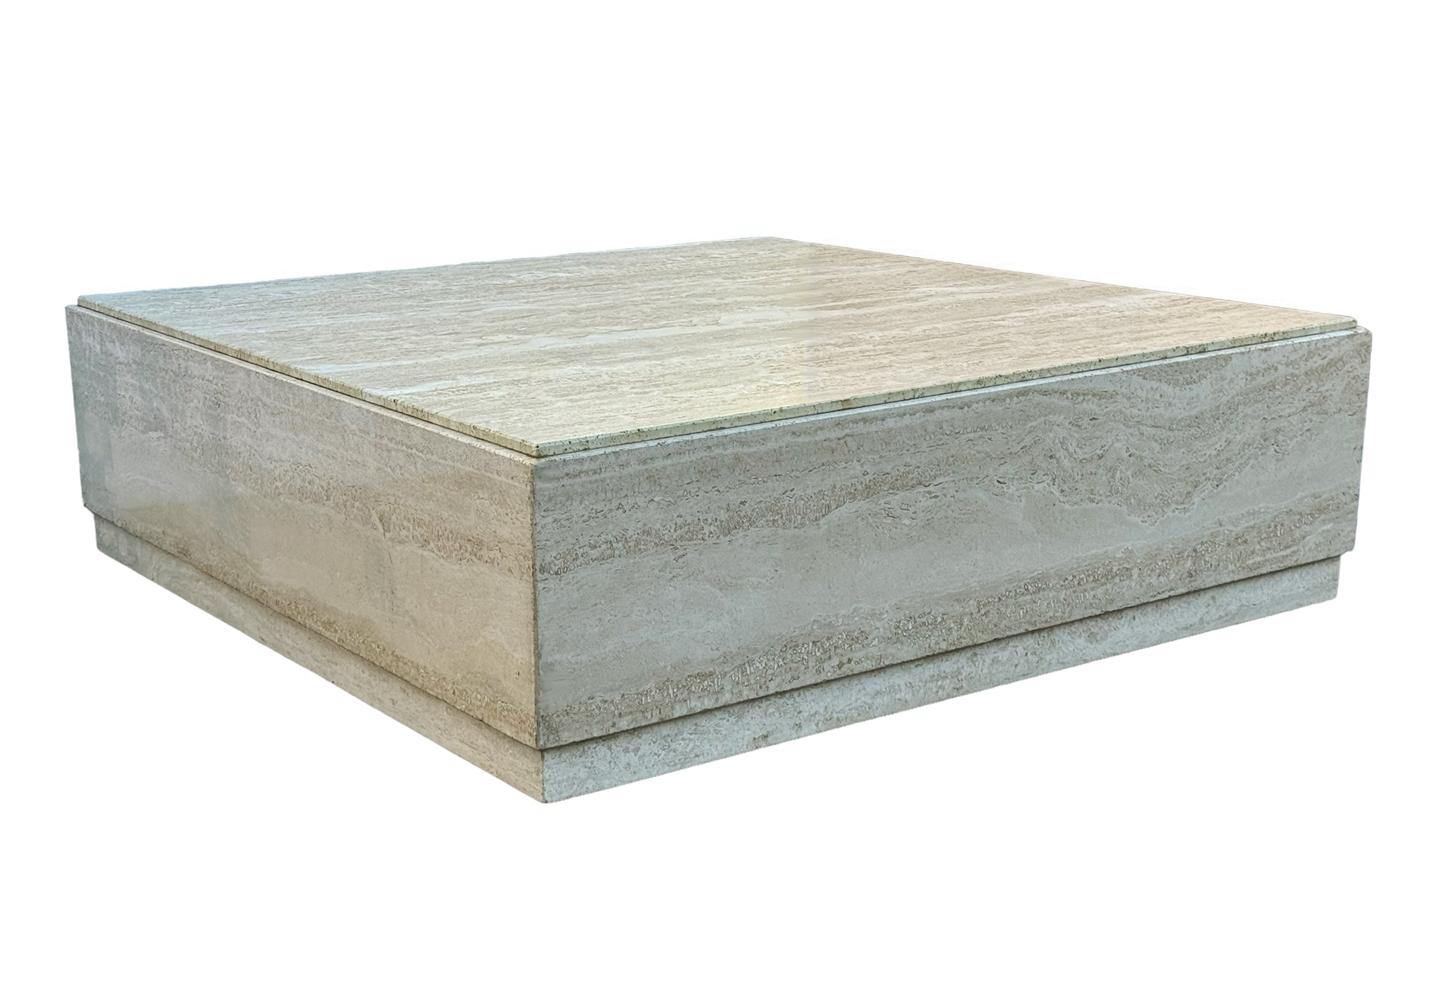 Low Midcentury Italian Modern Square Travertine Marble Cube Cocktail Table  For Sale 2